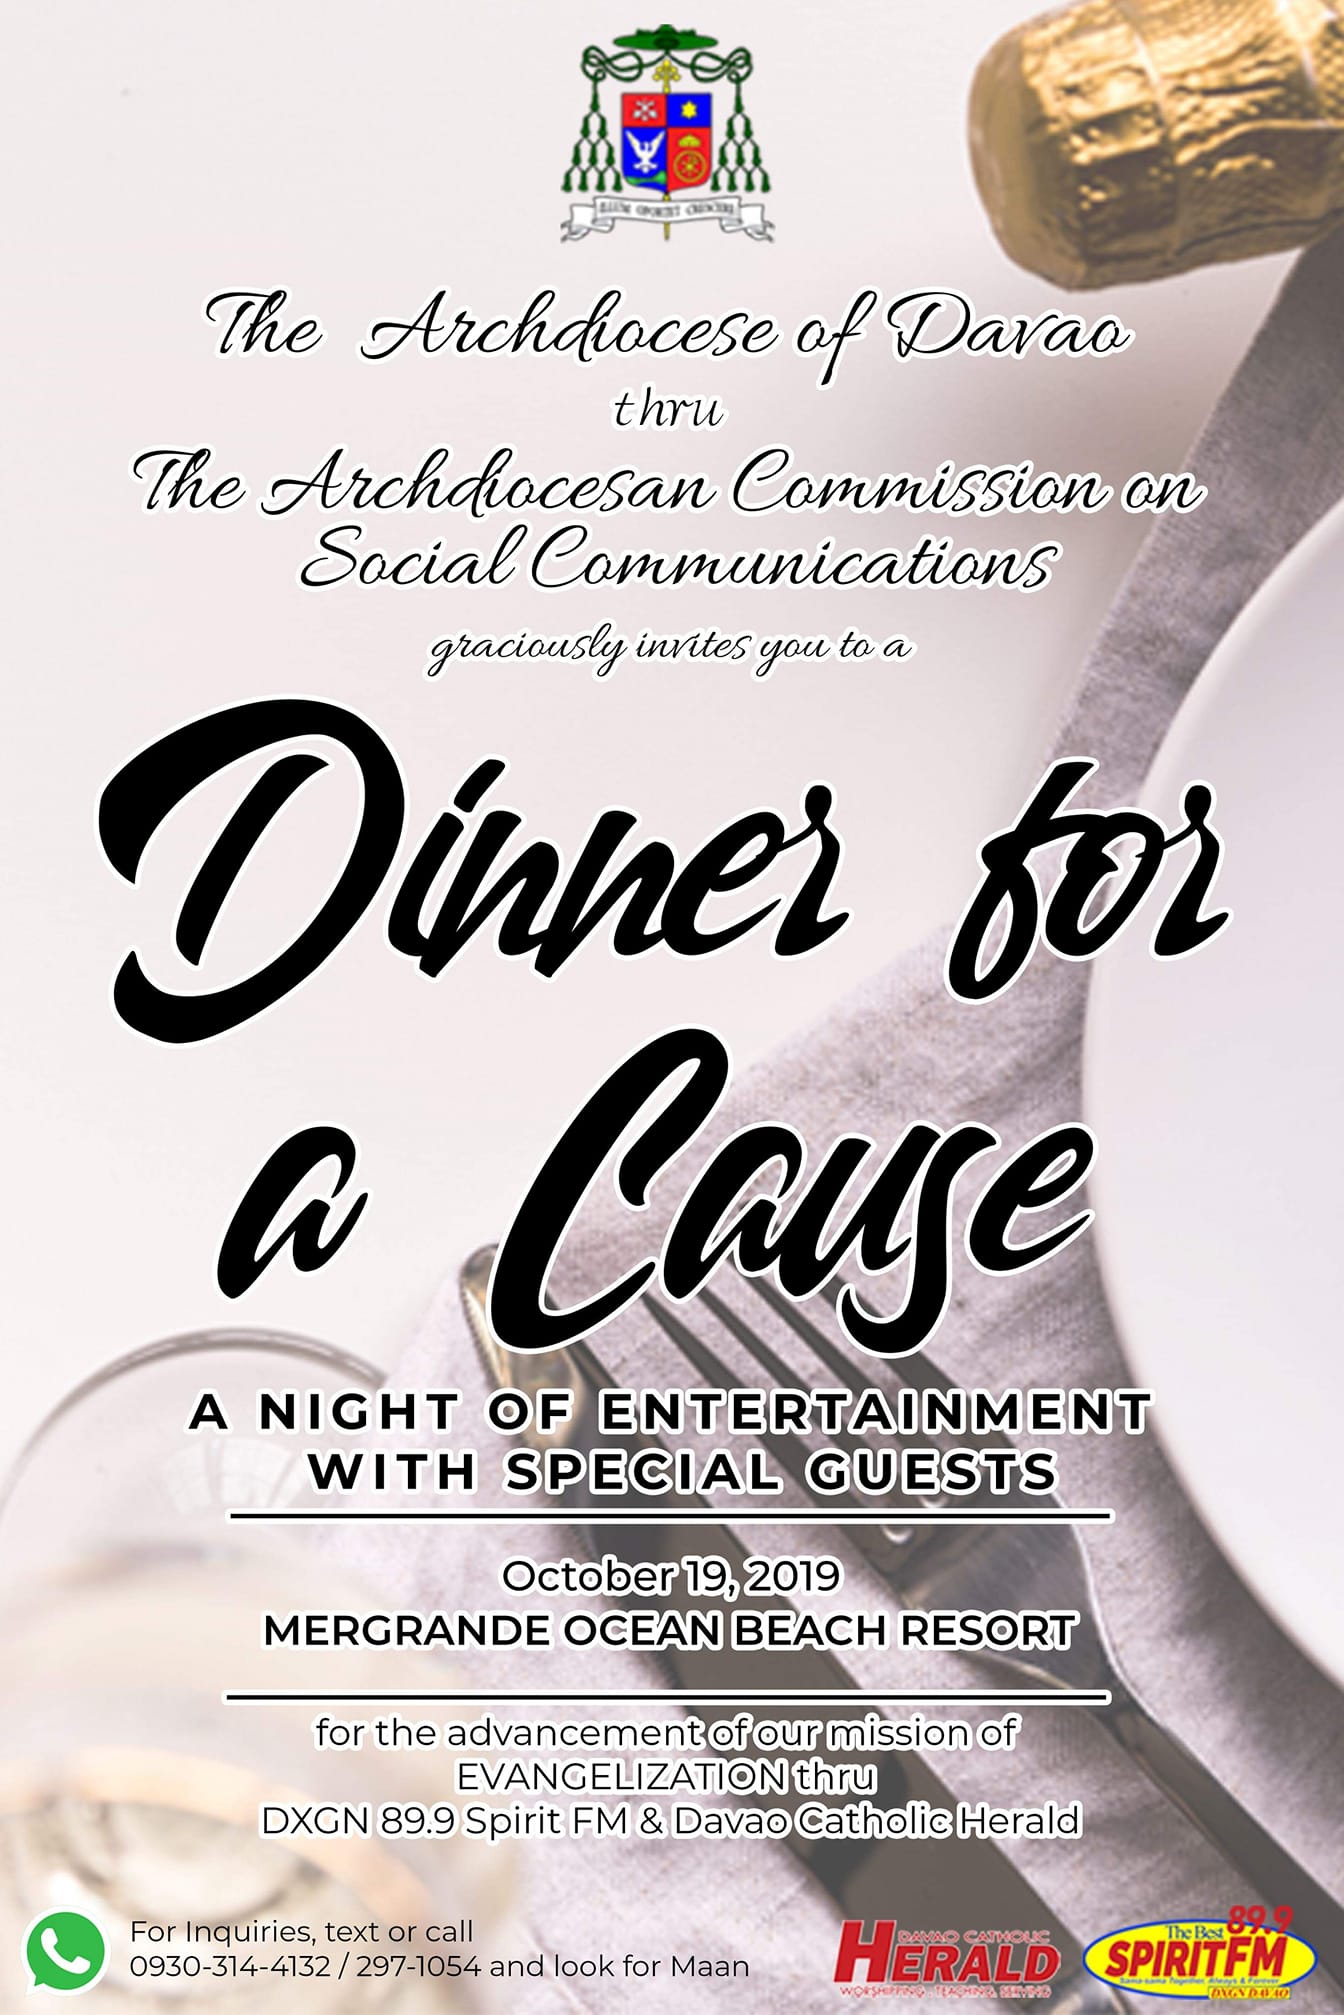 Dinner for a cause 2019